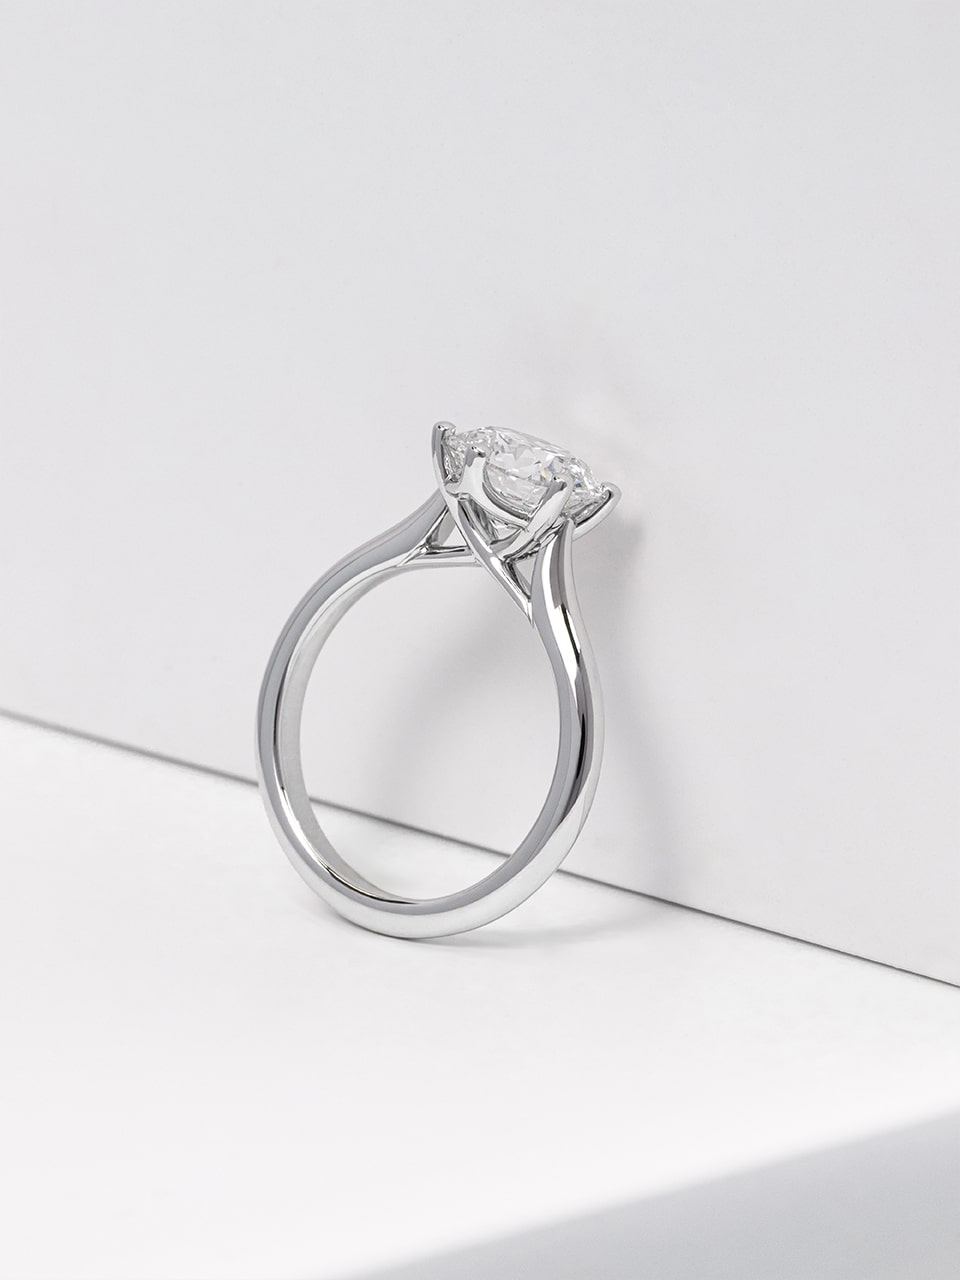 2 Carat Lab Grown Diamond Solitaire White Gold Engagement Ring